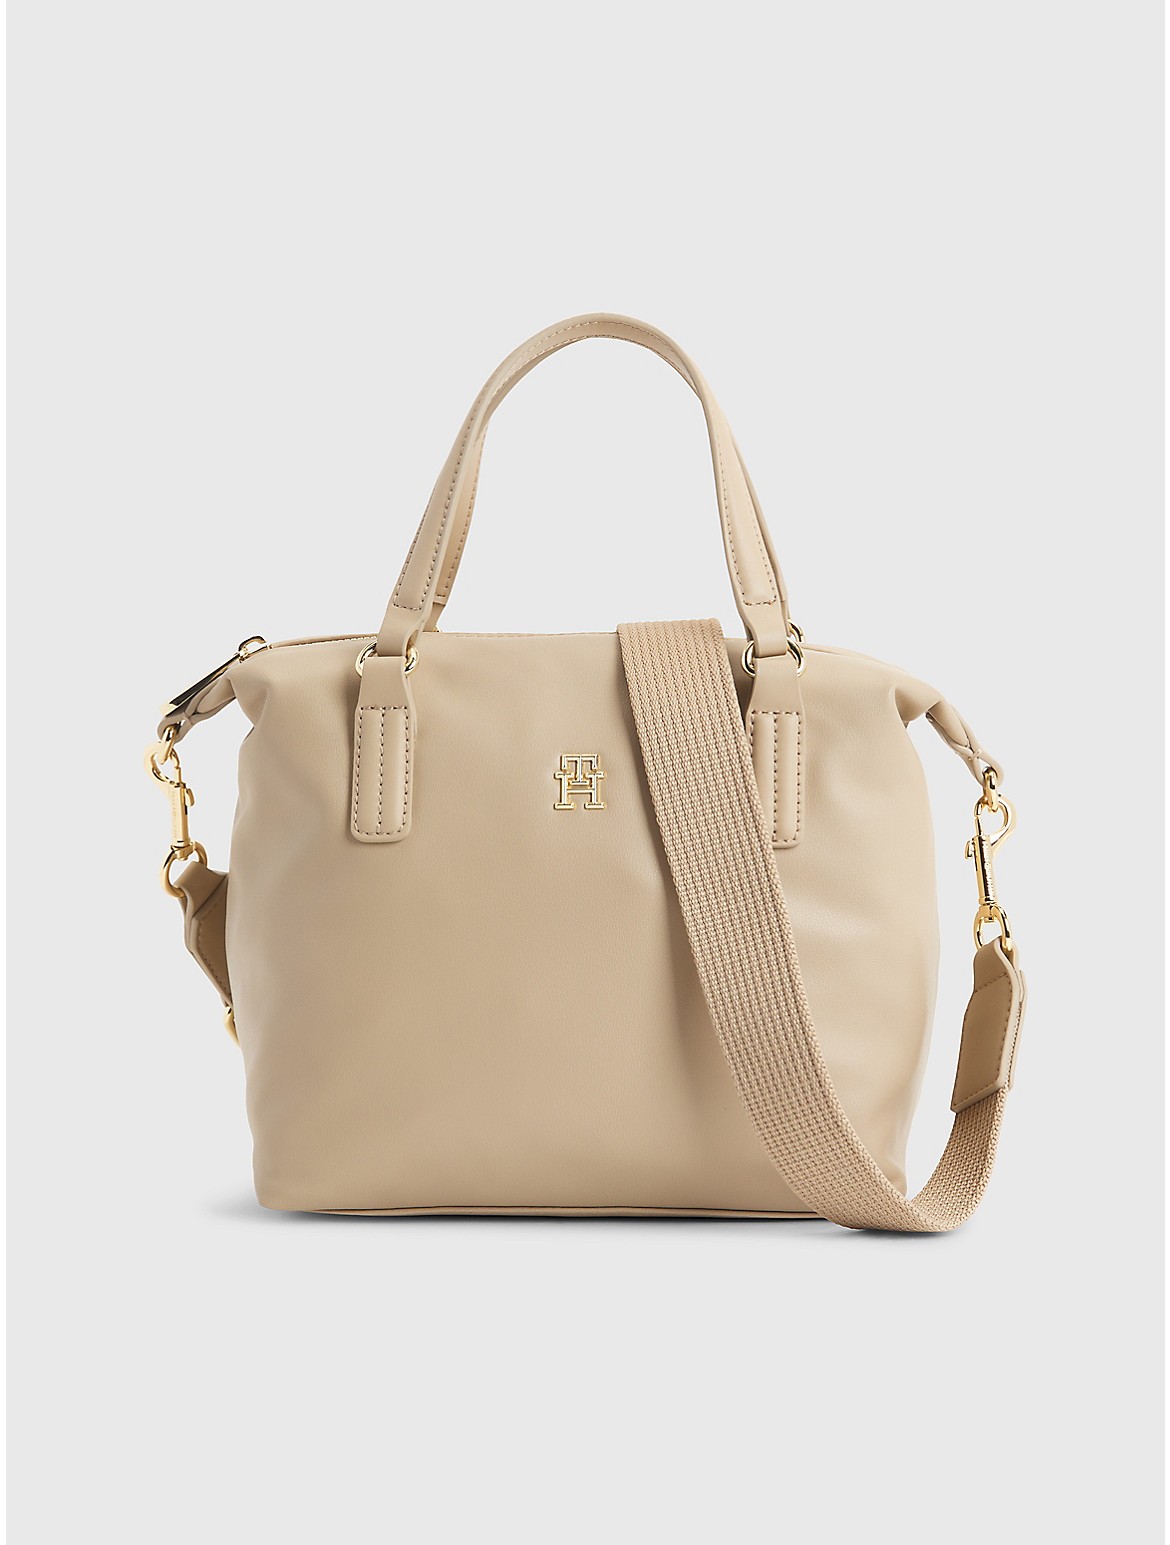 Tommy Hilfiger Women's TH Logo Small Tote - Beige